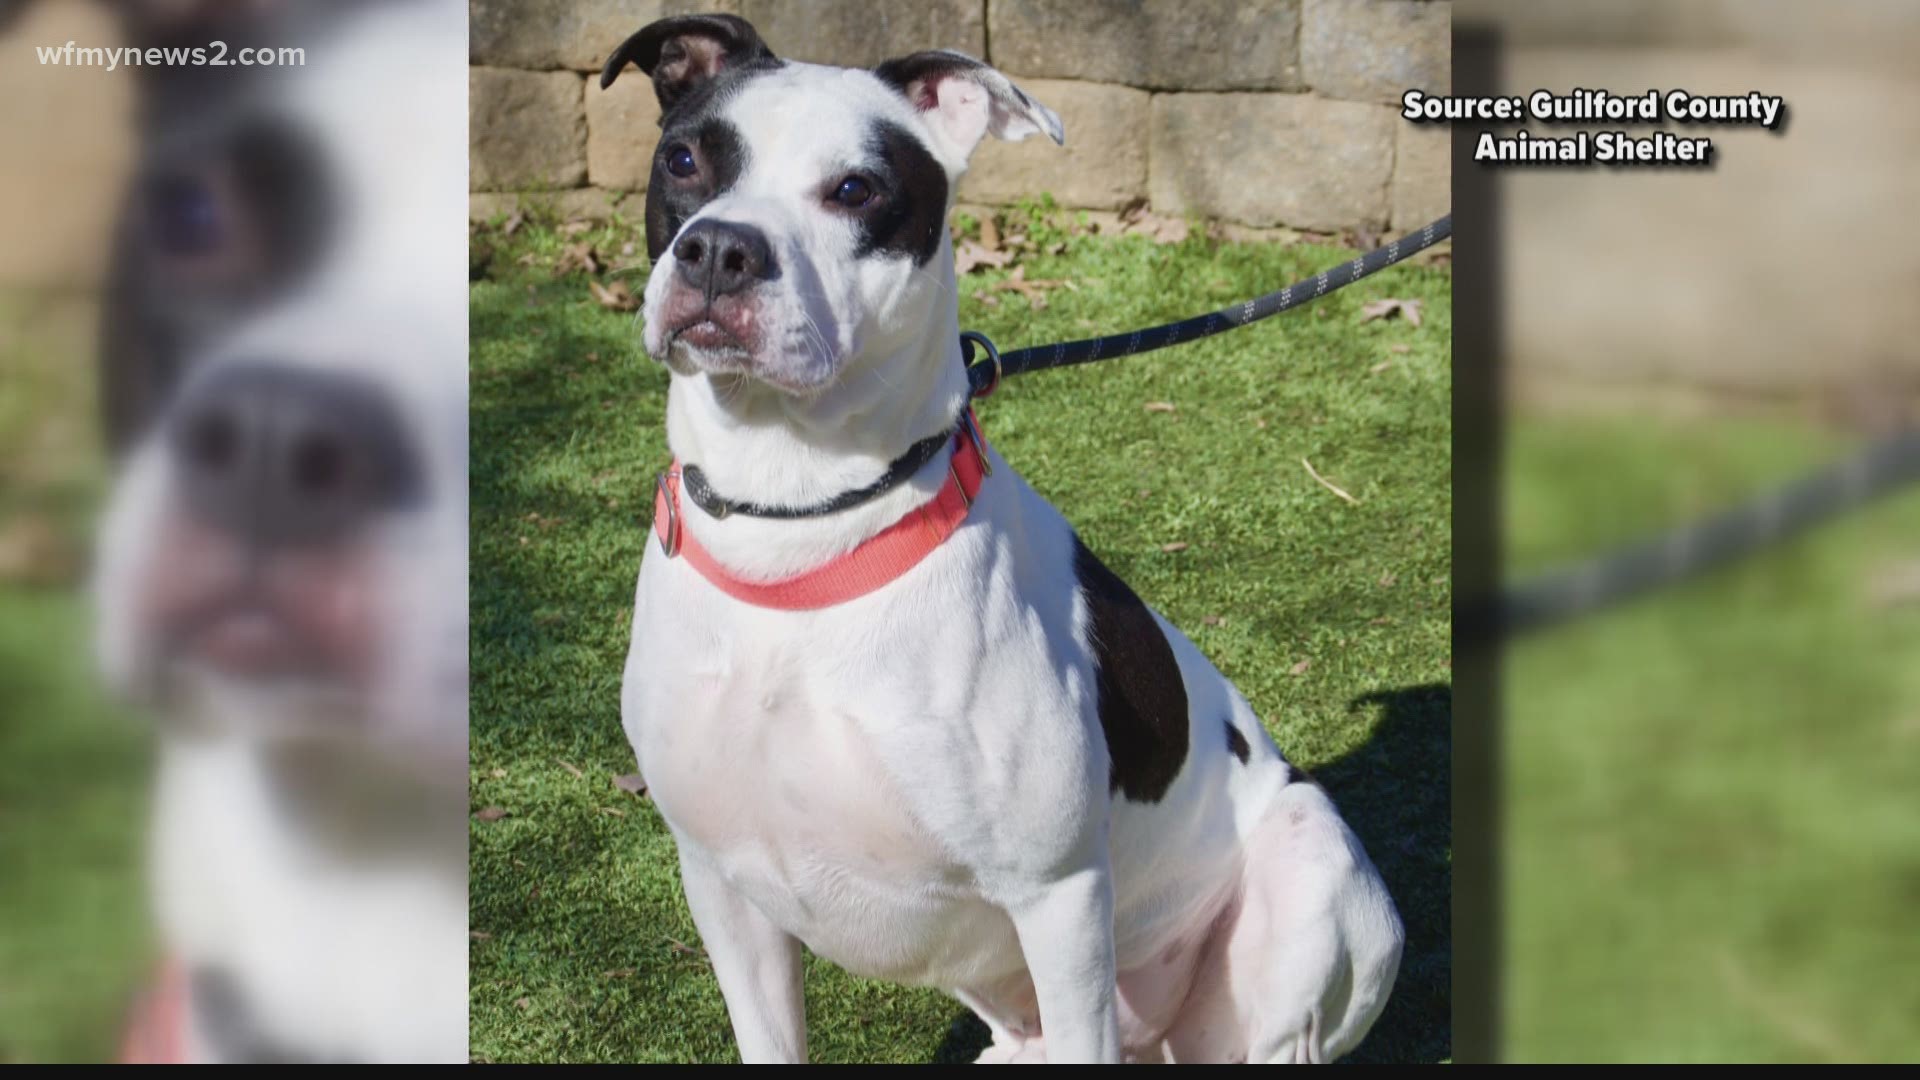 This sweet boxer wants to be a part of your family celebrations this holiday season.